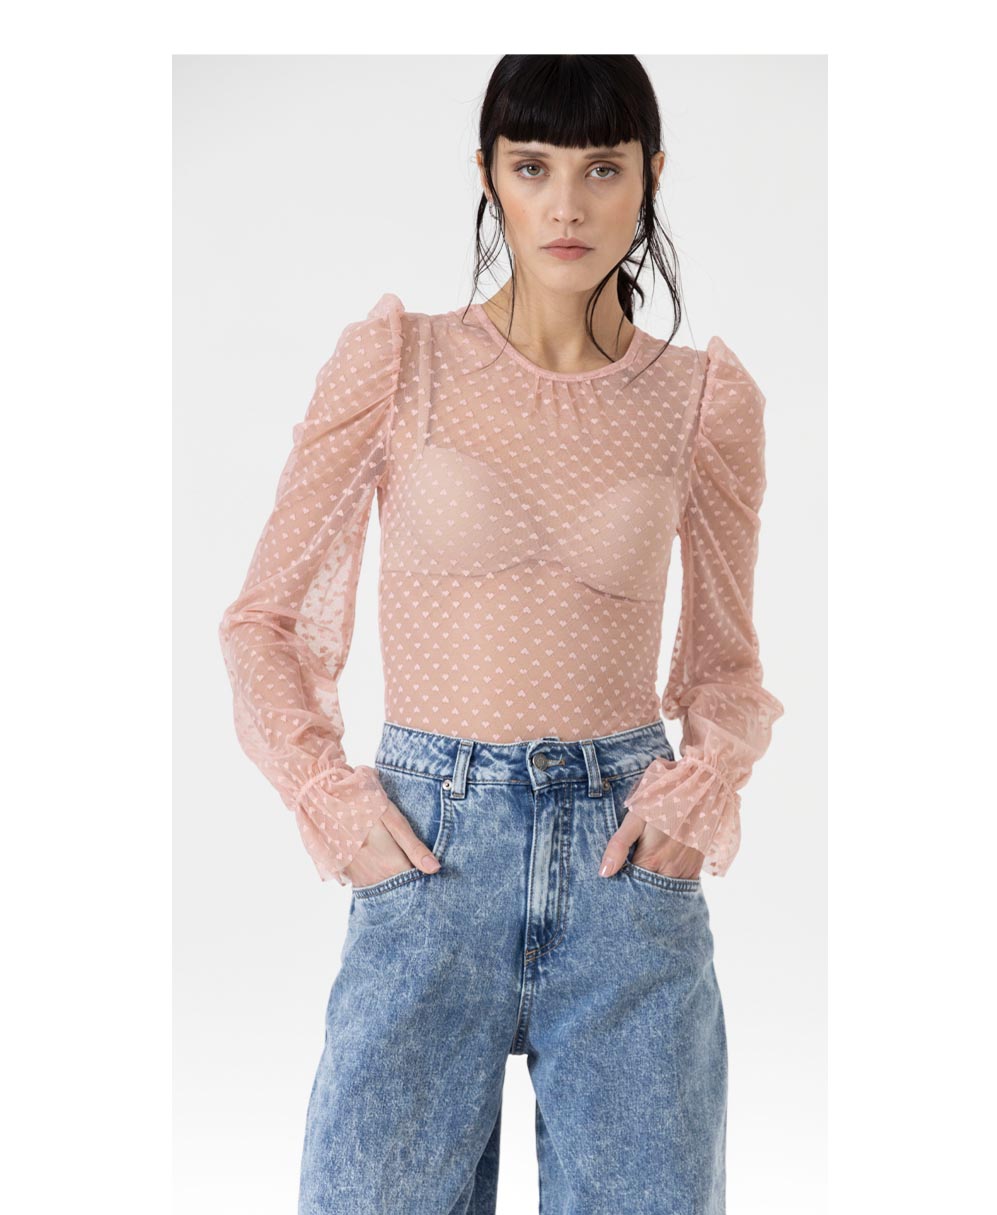 see through top mplouza me diafaneia made in italy summer 2020